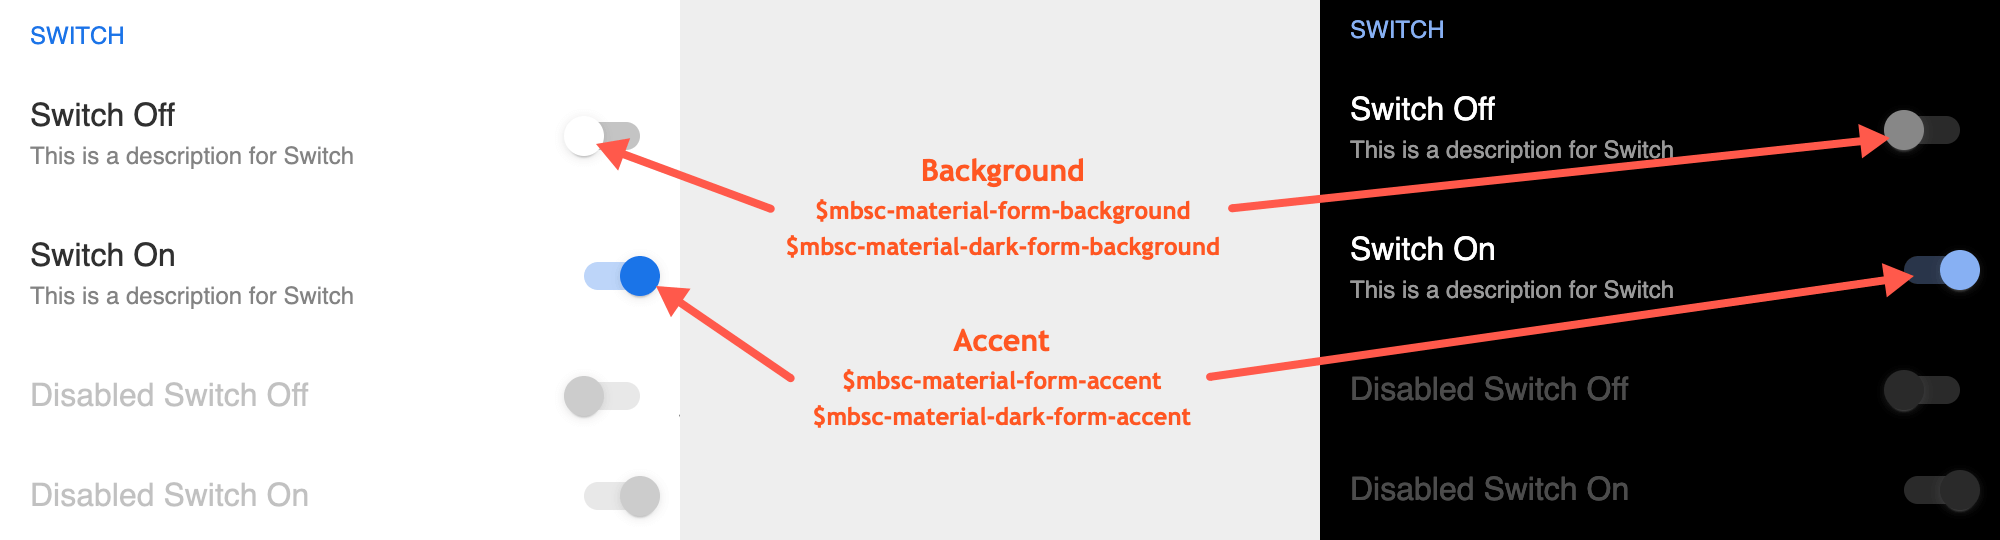 Picture of which variable affects which part of the Switch in Material.